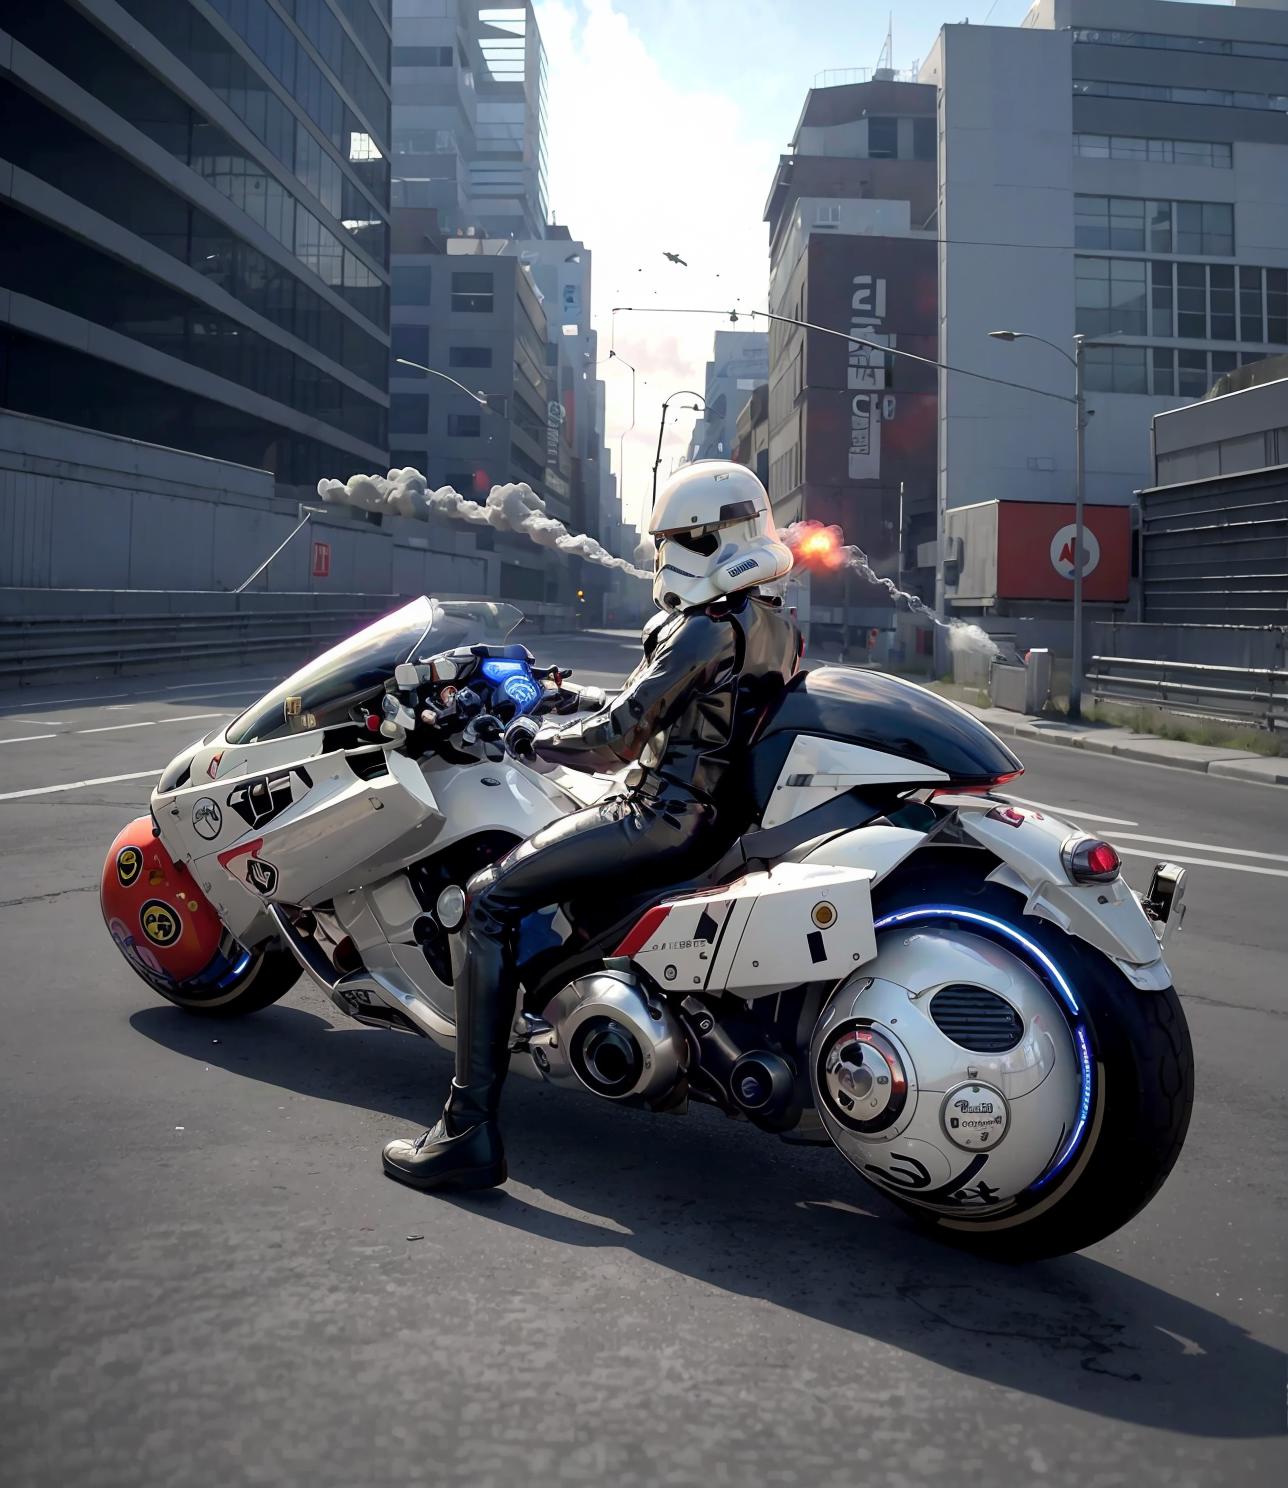 A person wearing a Stormtrooper costume riding a motorcycle on a city street.